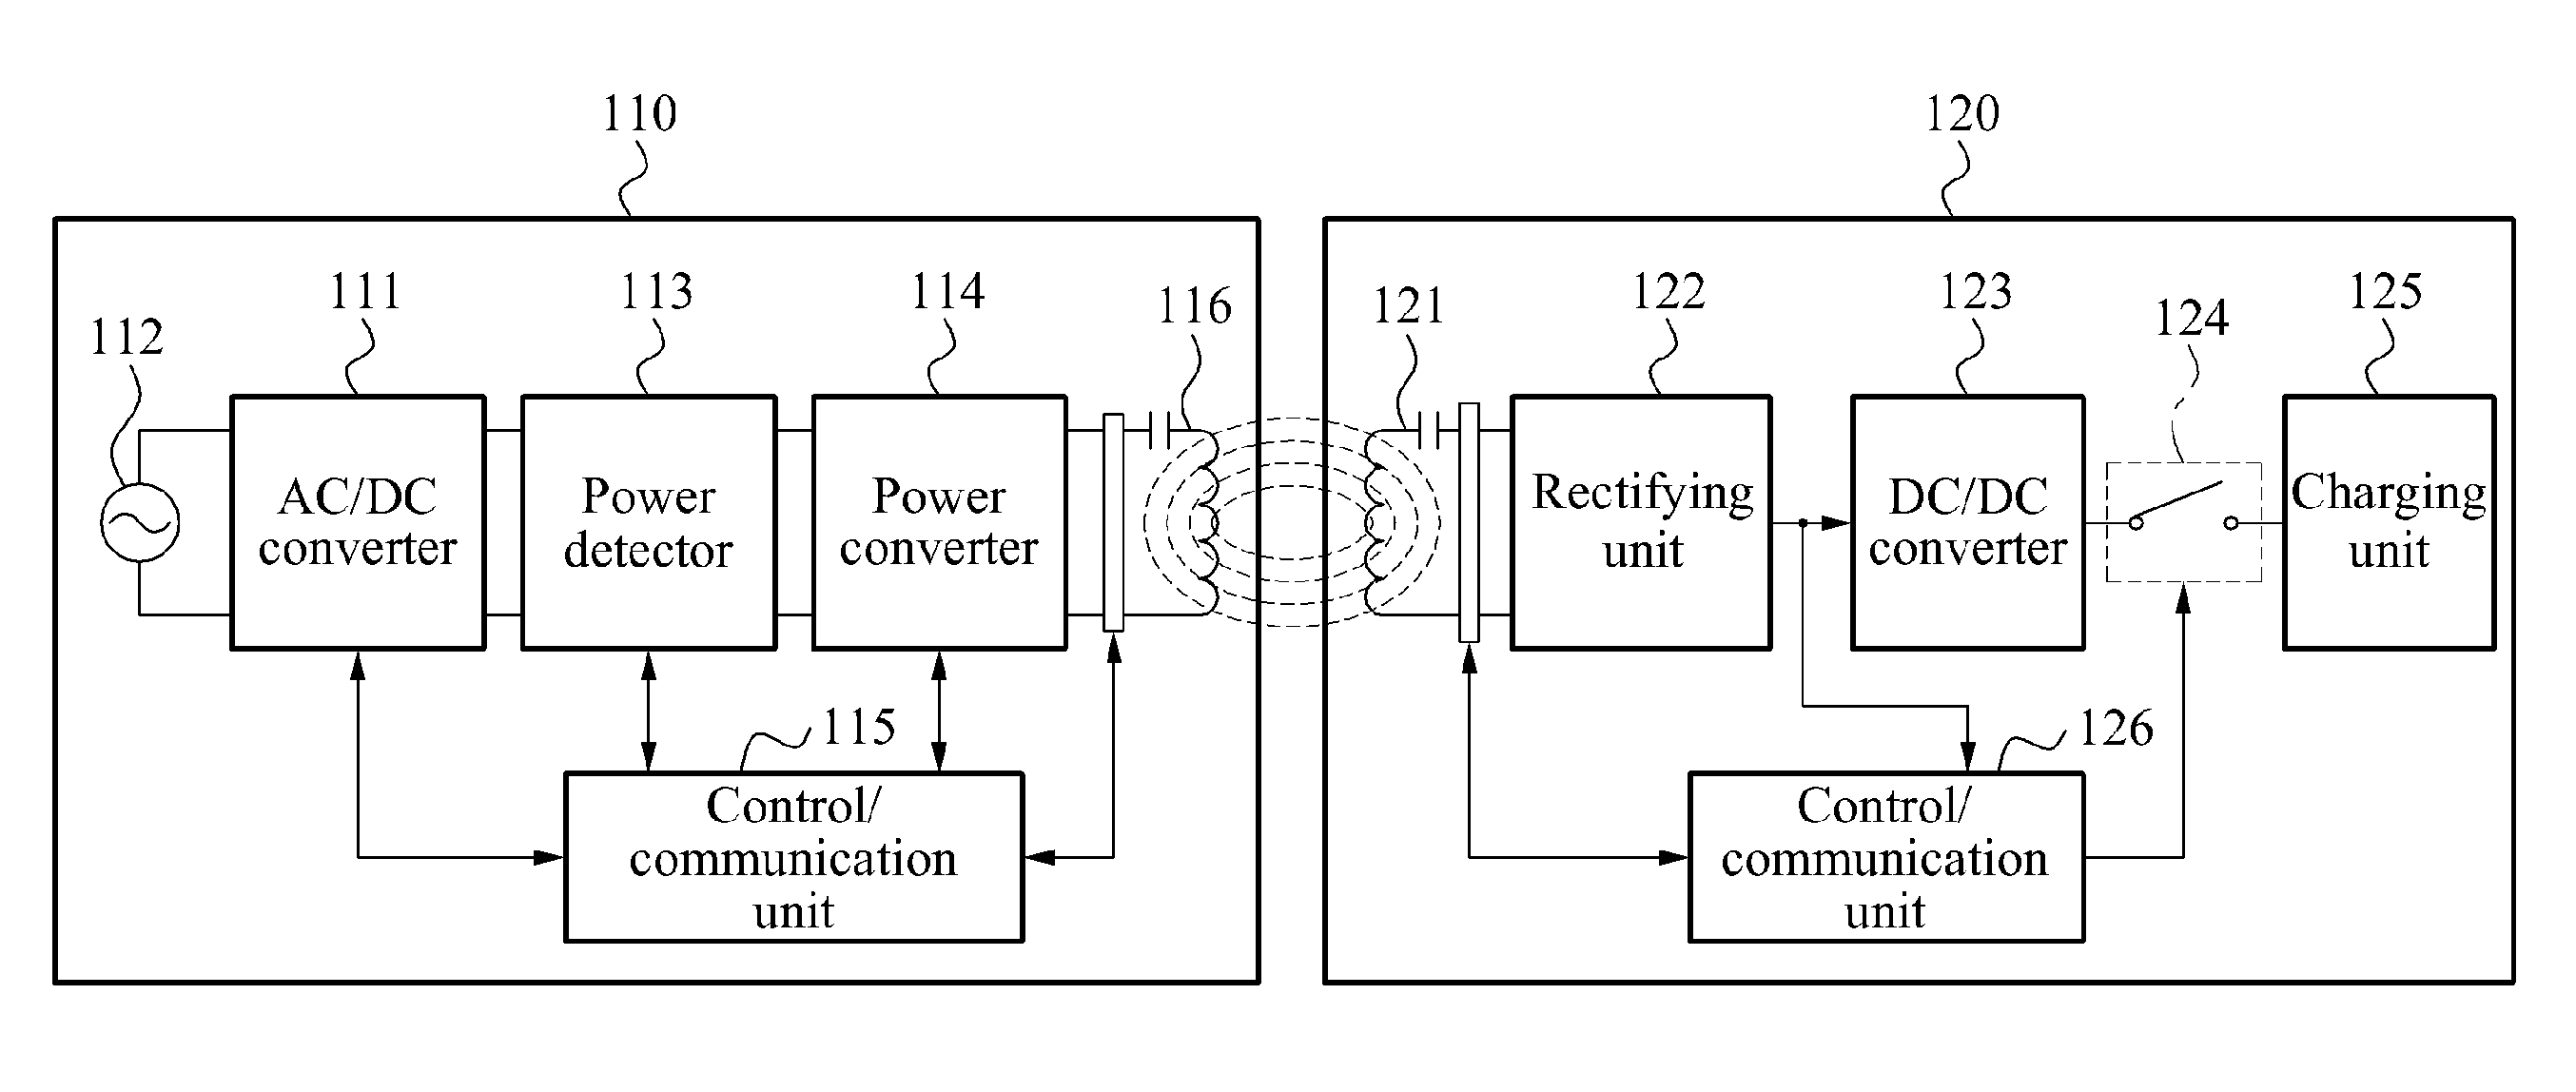 Apparatus and method for data communication using wireless power